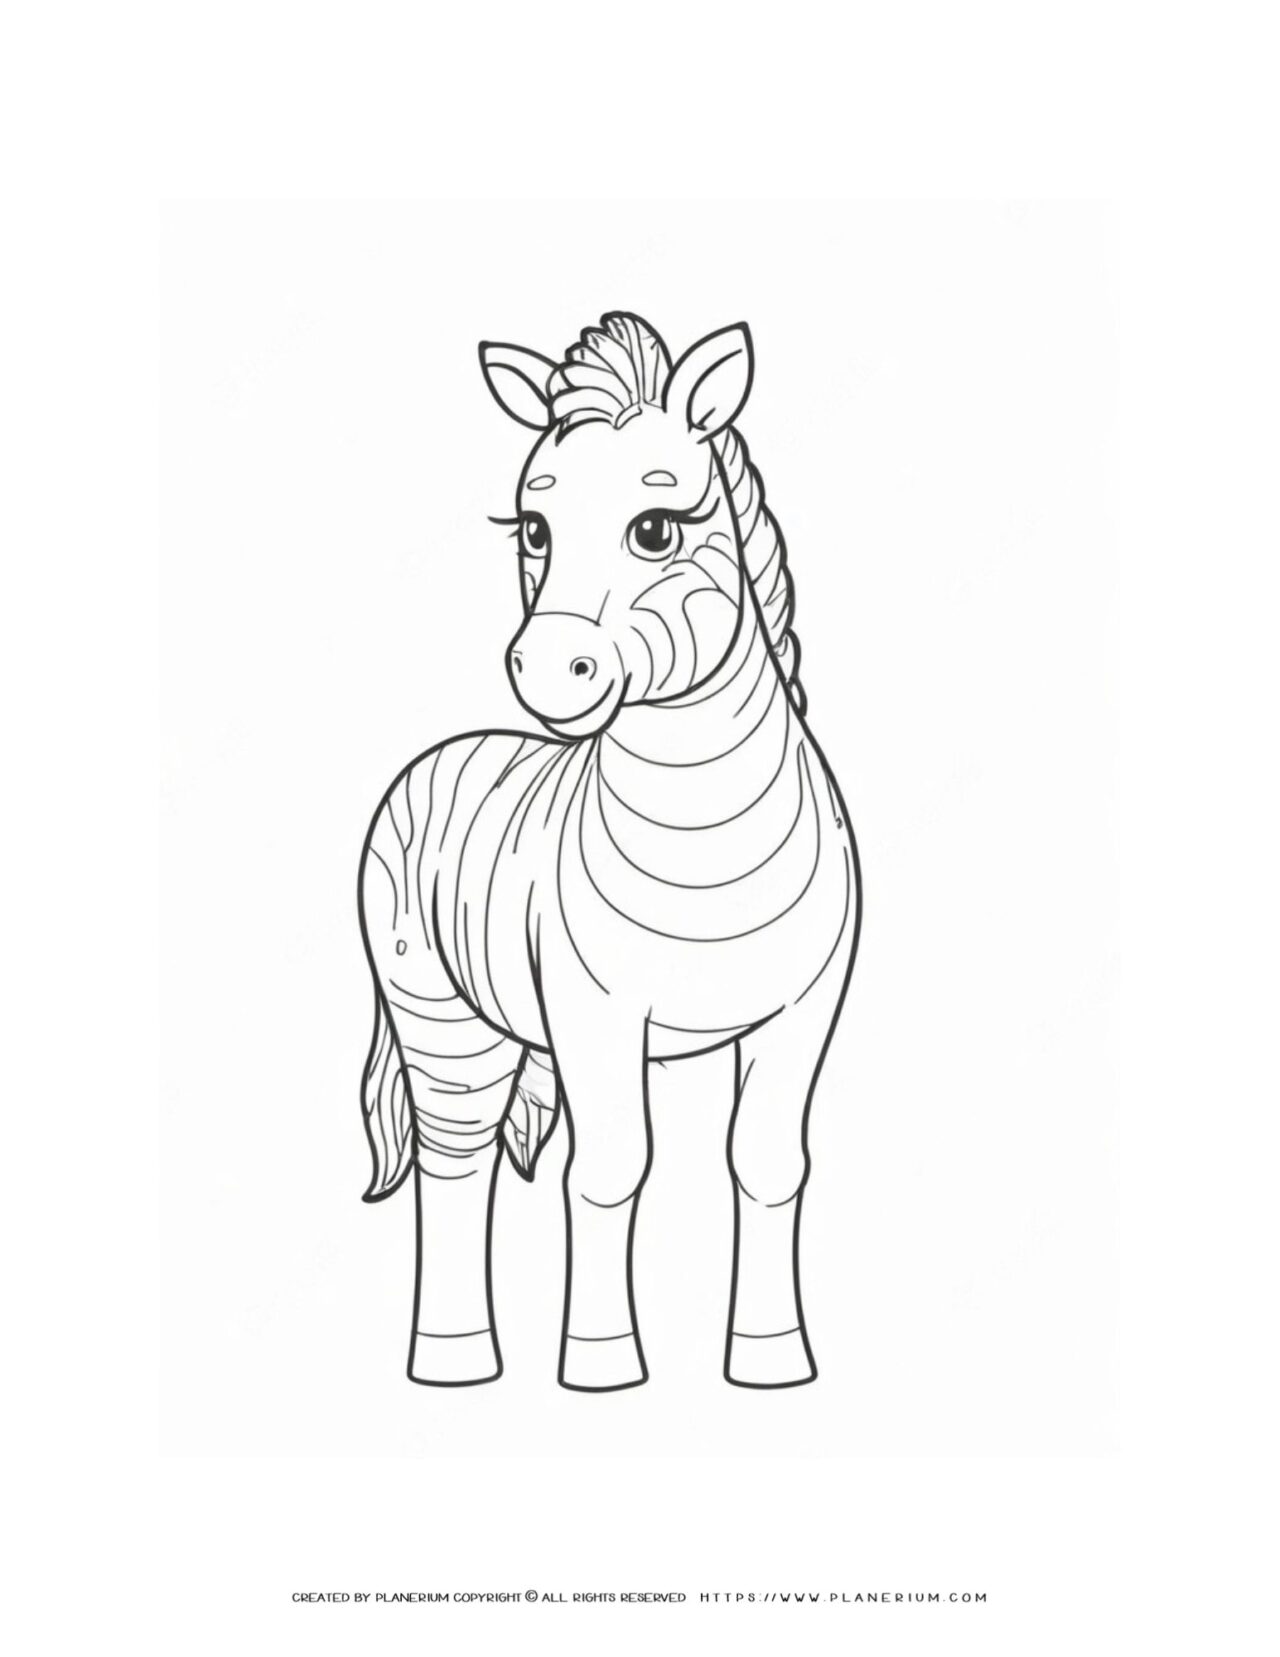 Simple-Zebra-Outline-Coloring-Page-for-Kids